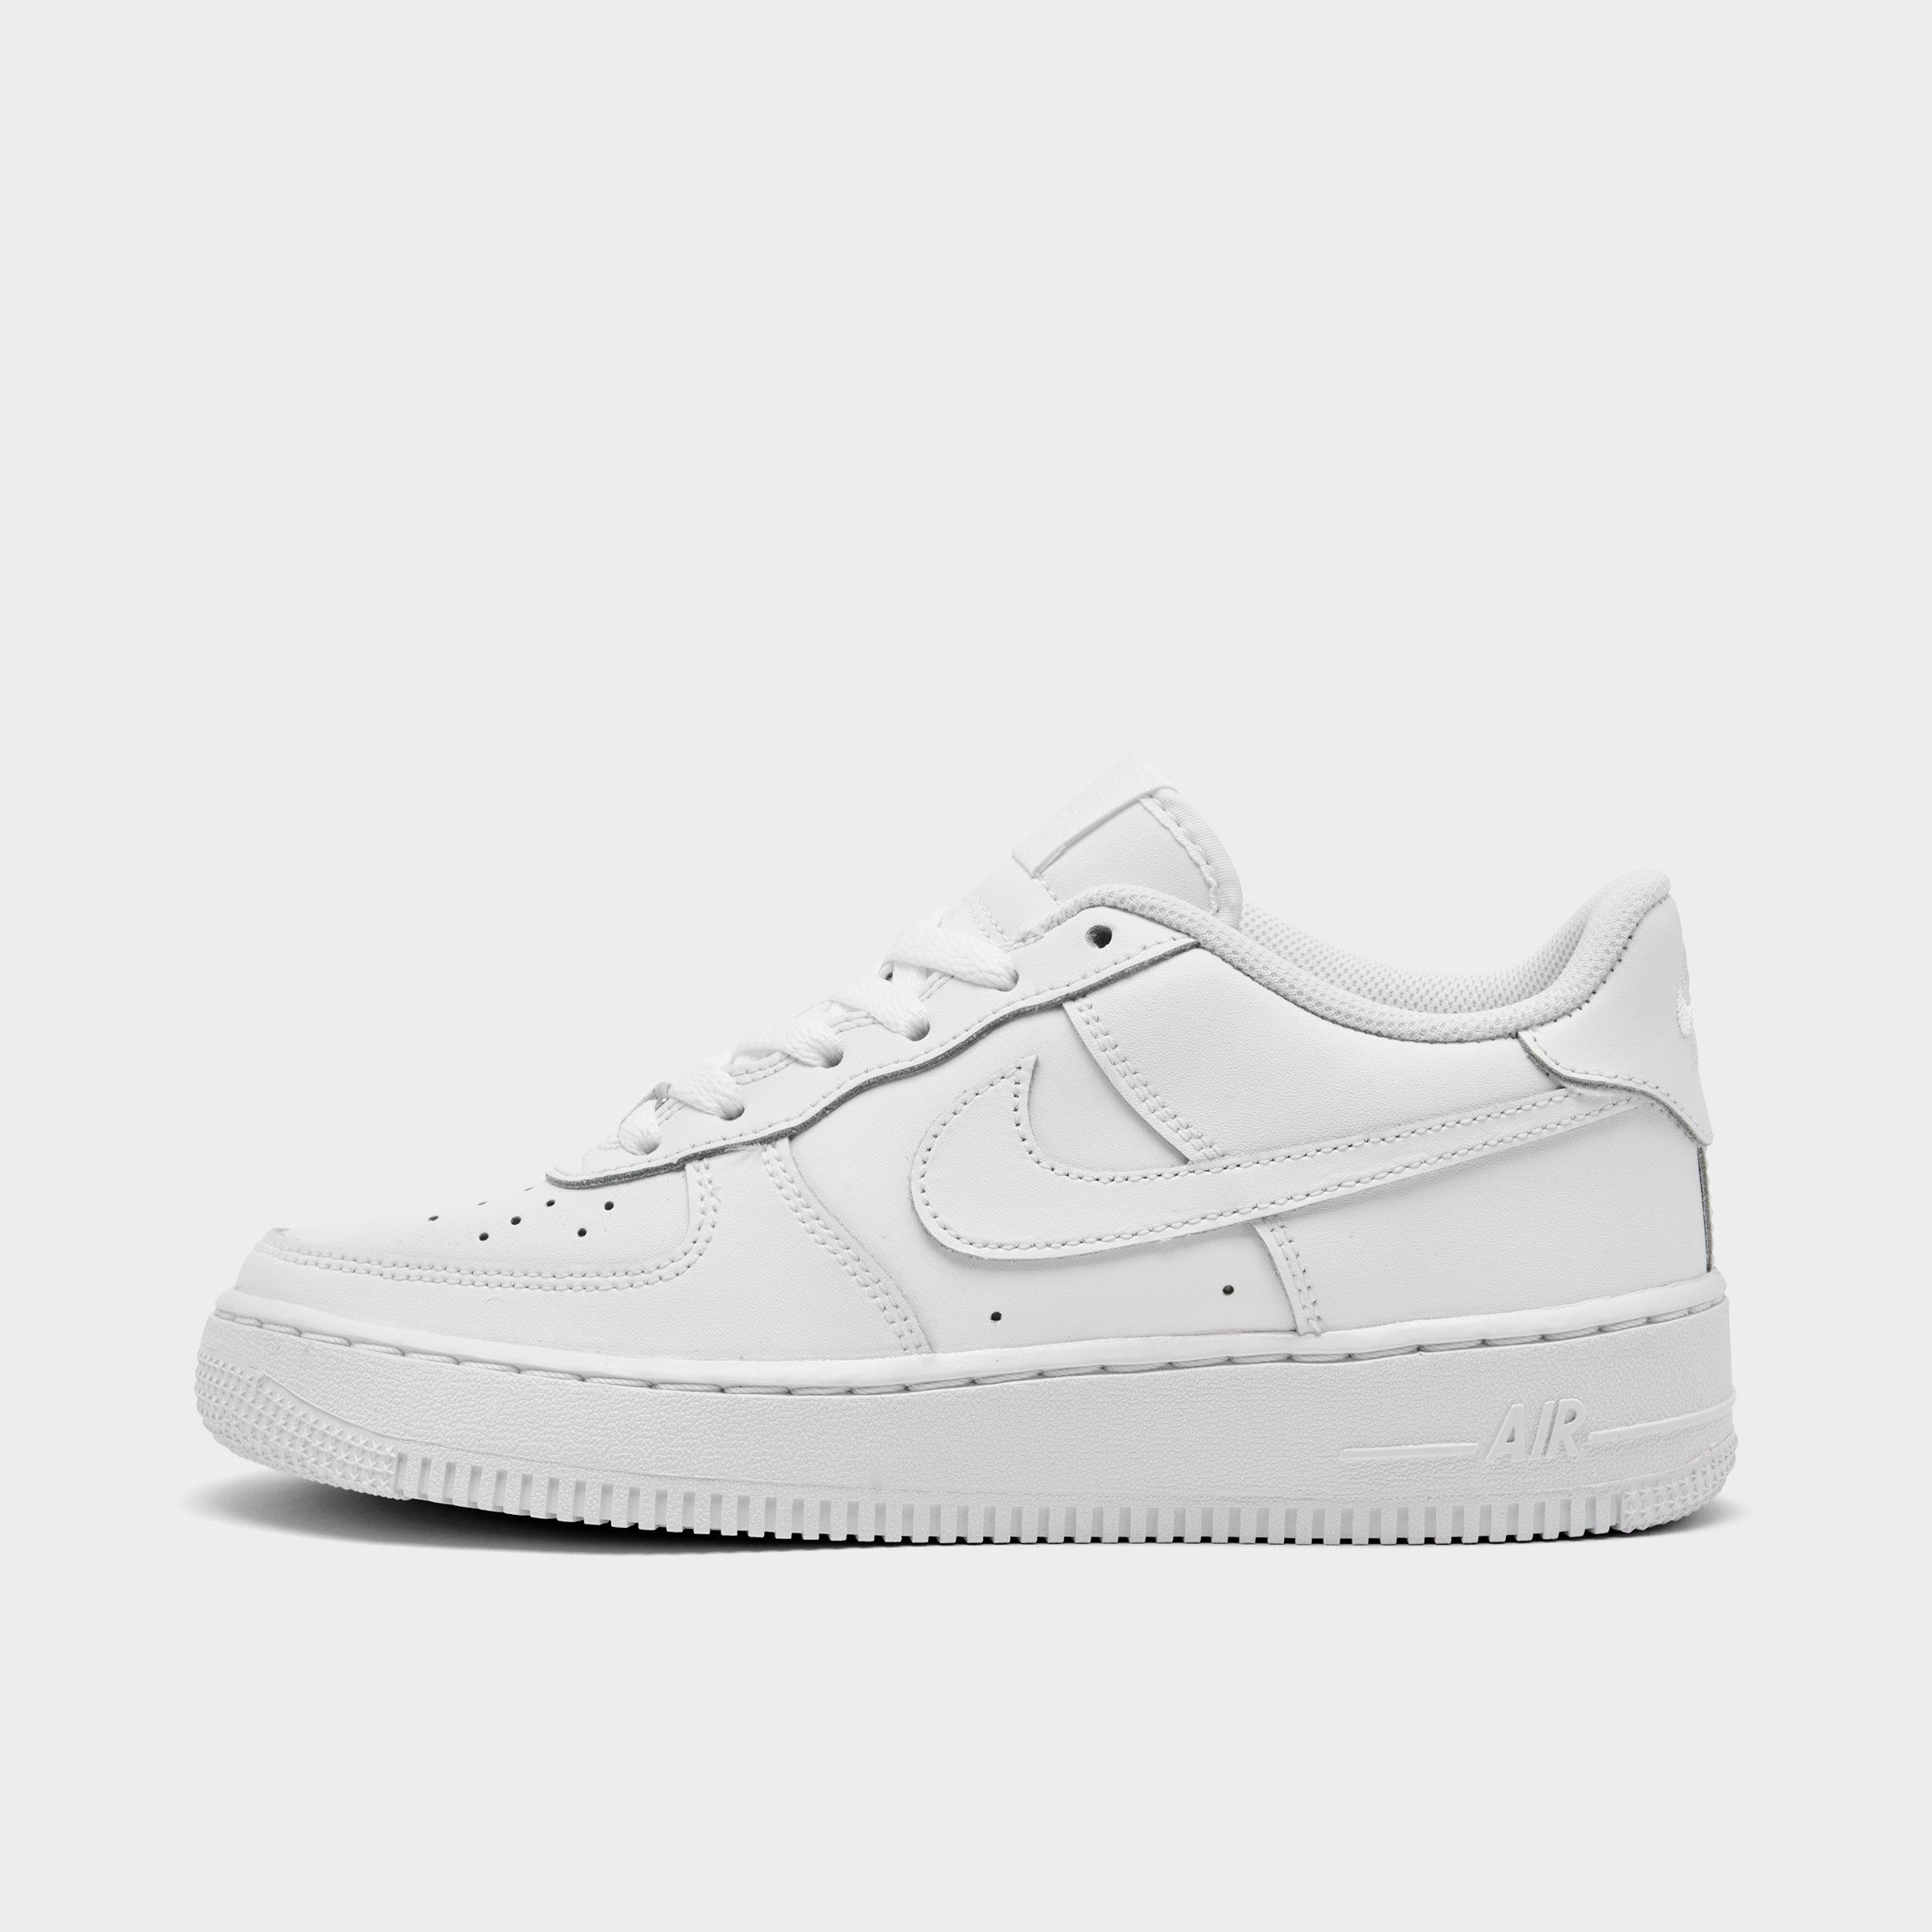 nike air force 1 size 6.5 womens